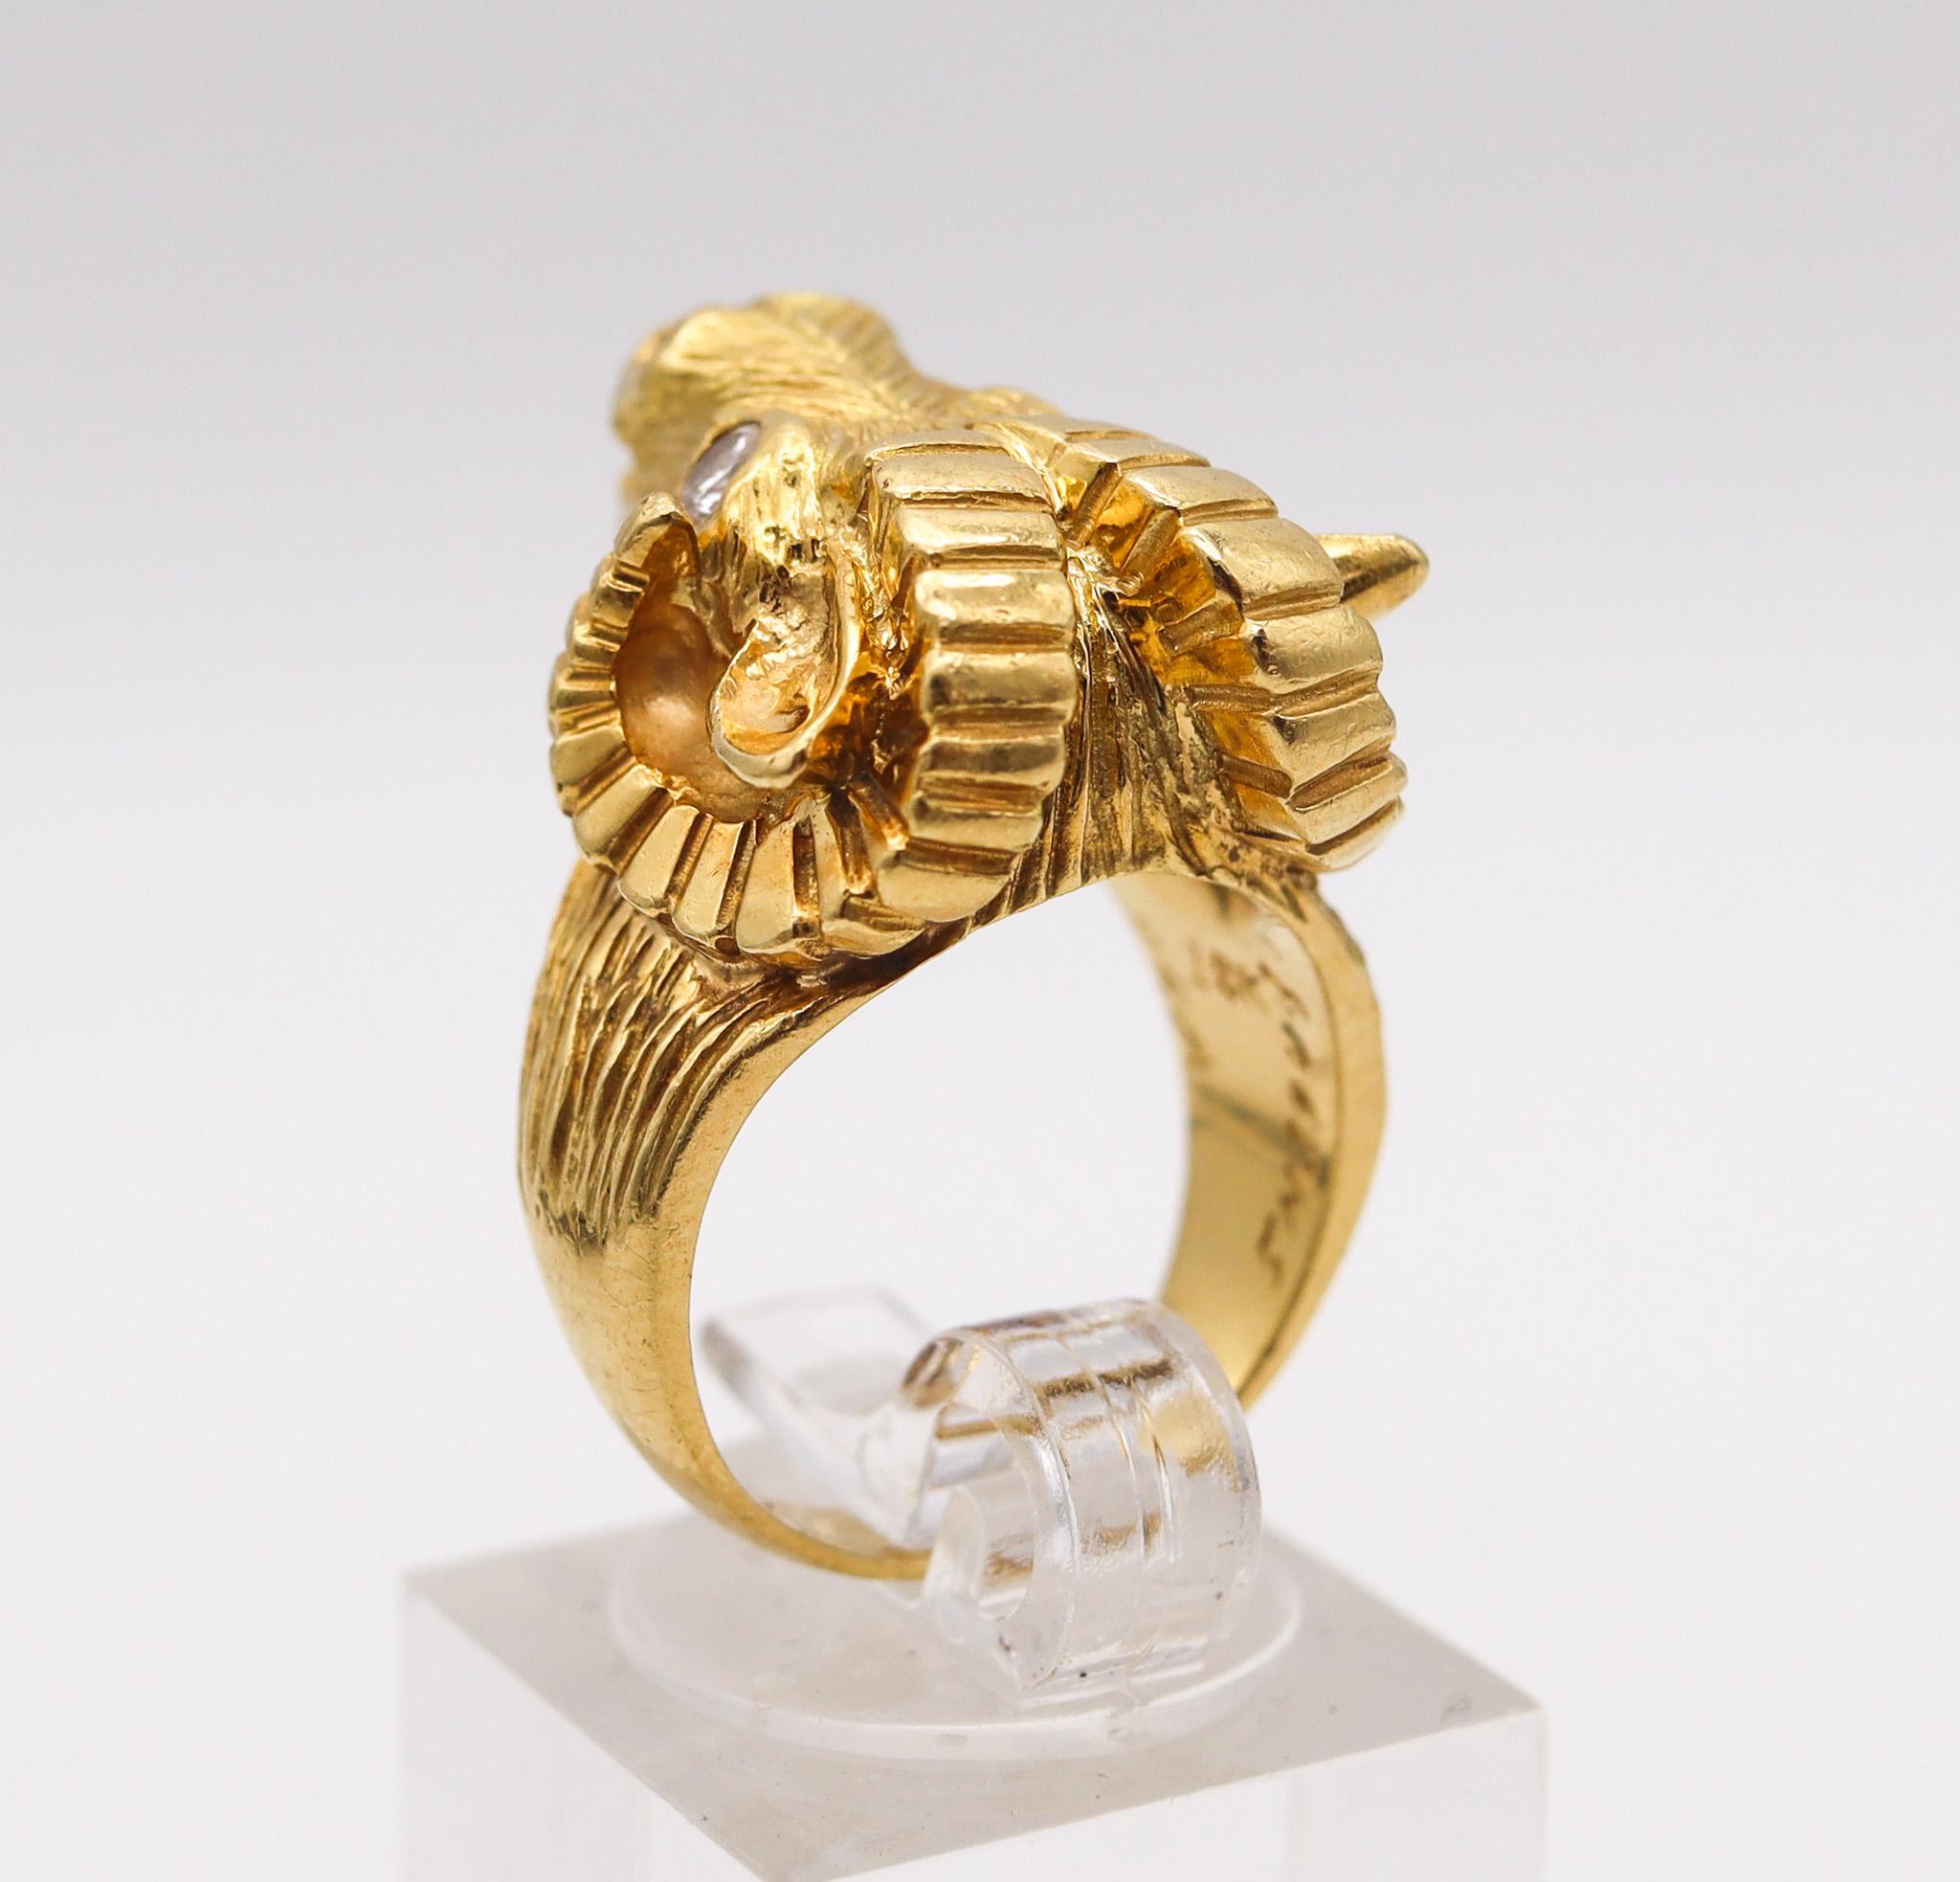 Brilliant Cut Van Cleef & Arpels 1970 Taurus Zodiacal Ring In 18Kt Gold With Two Diamonds